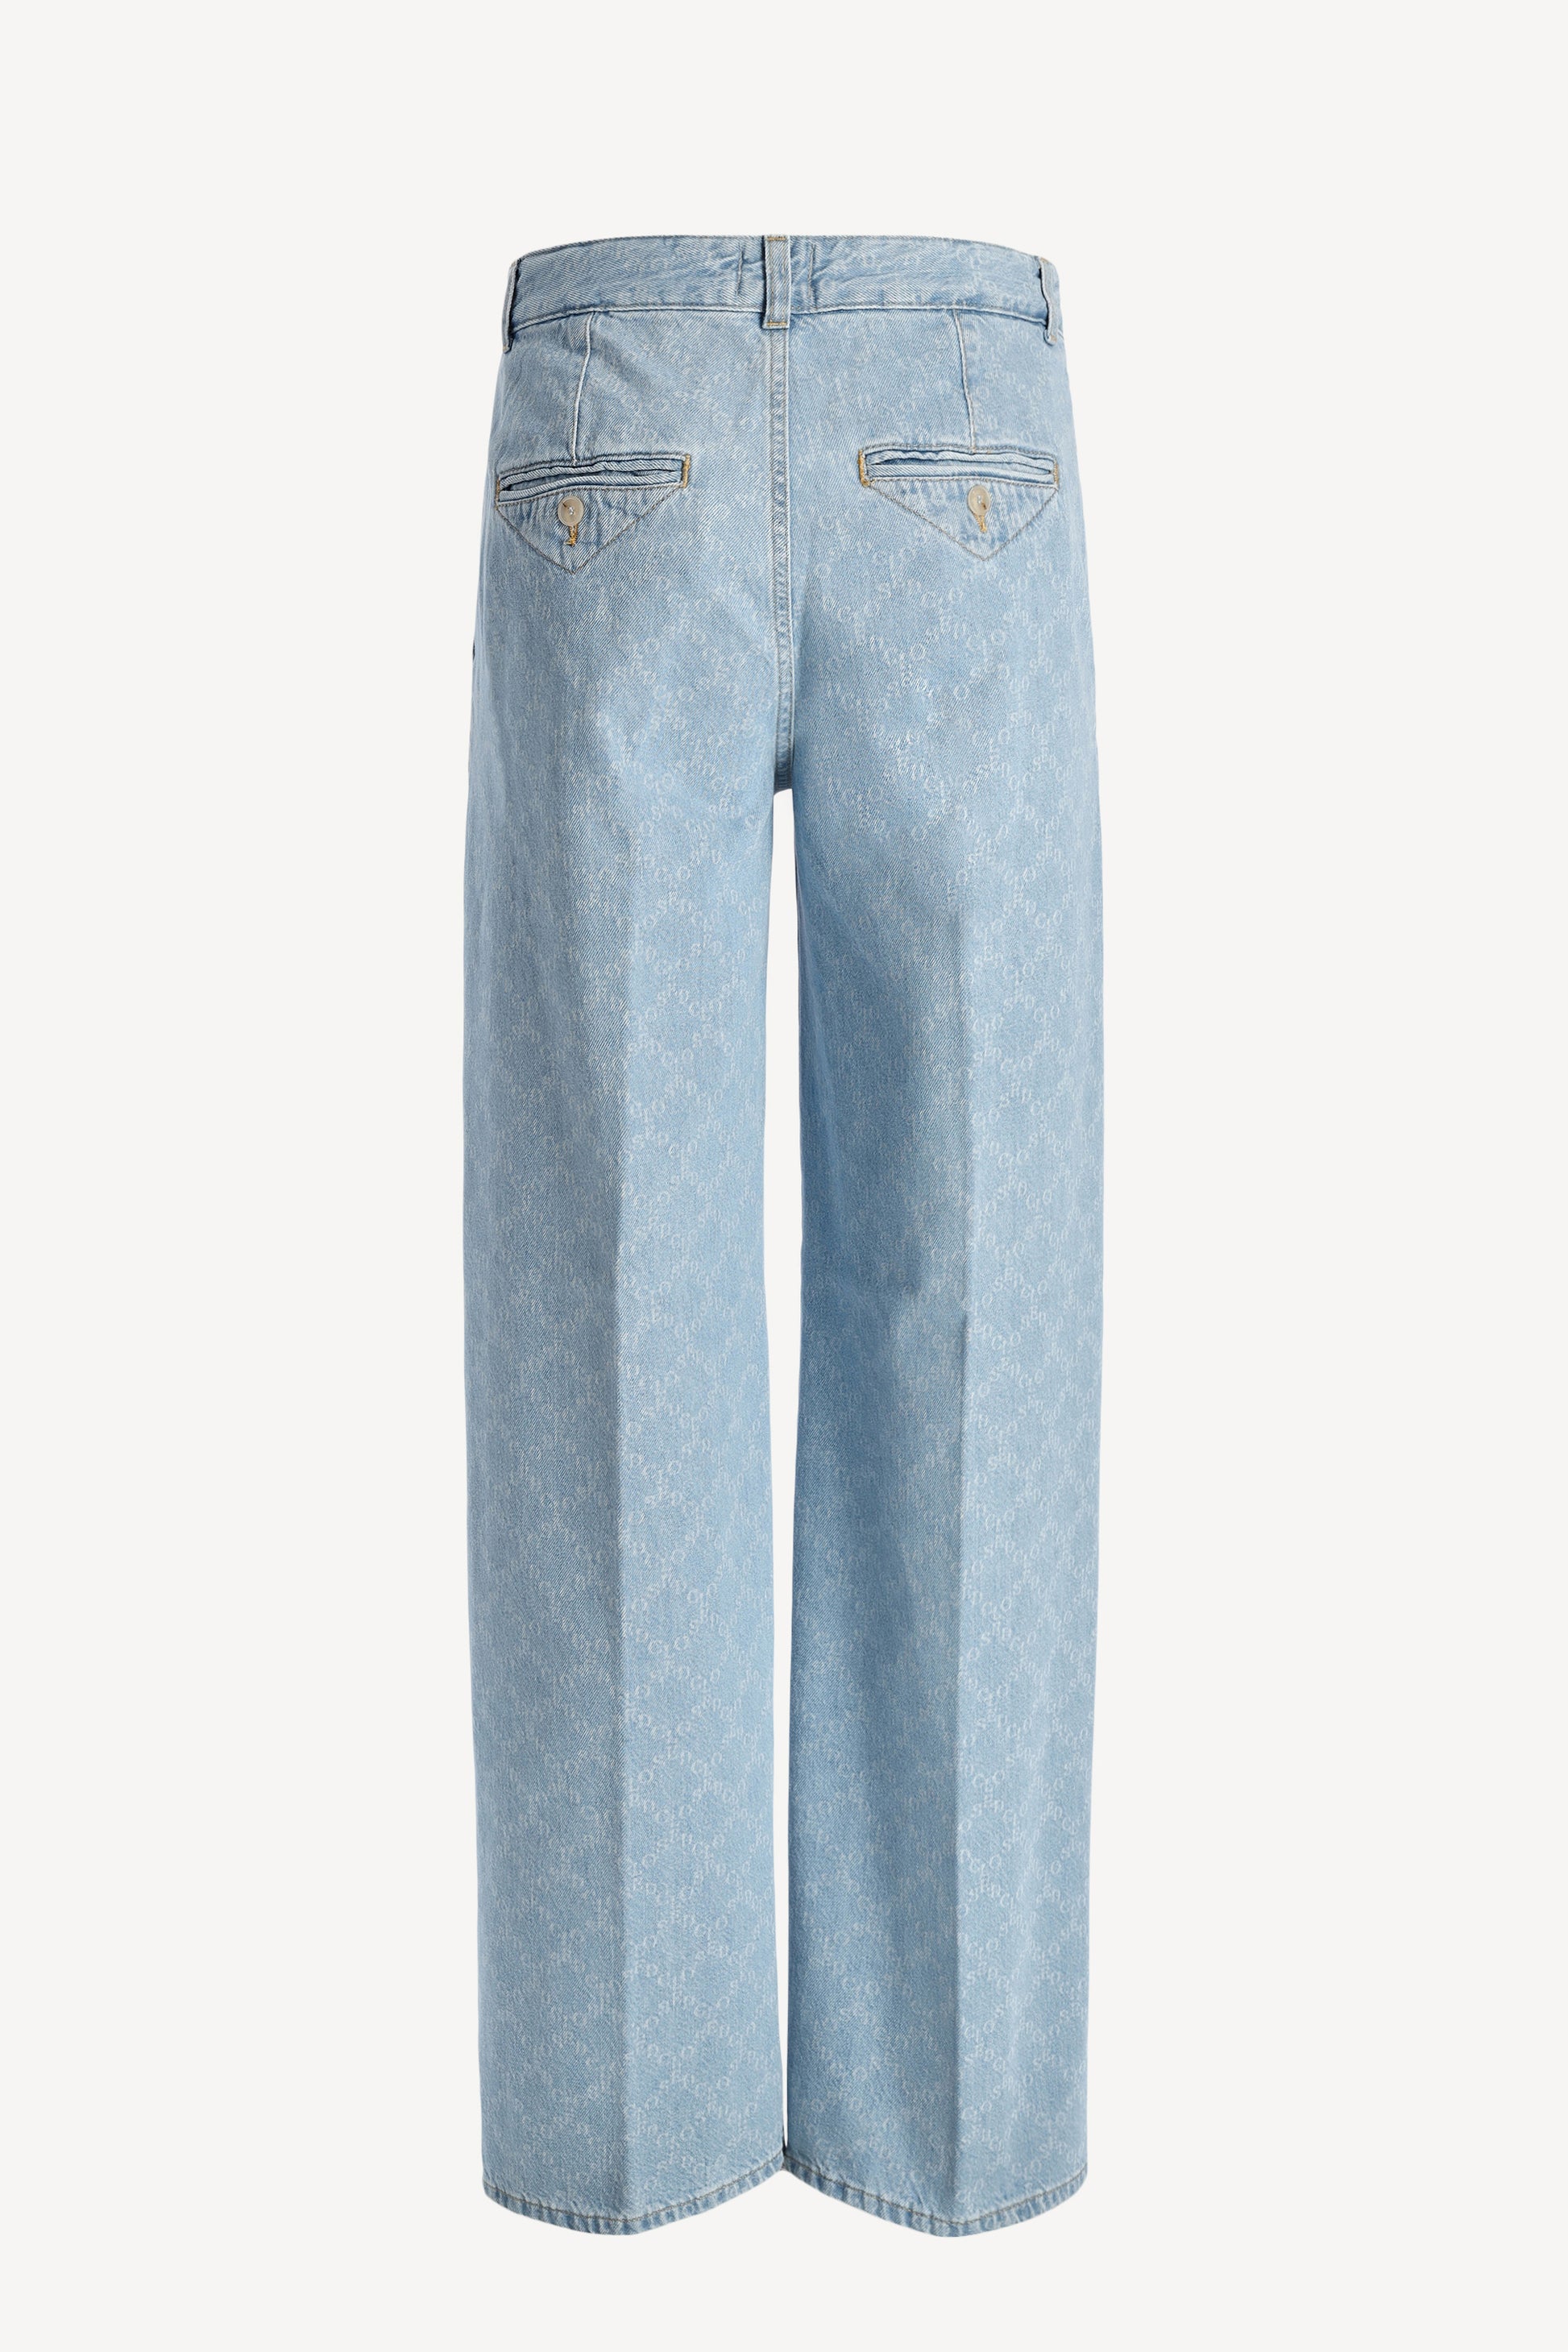 Jeans Jurdy Print in Light BlueClosed - Anita Hass